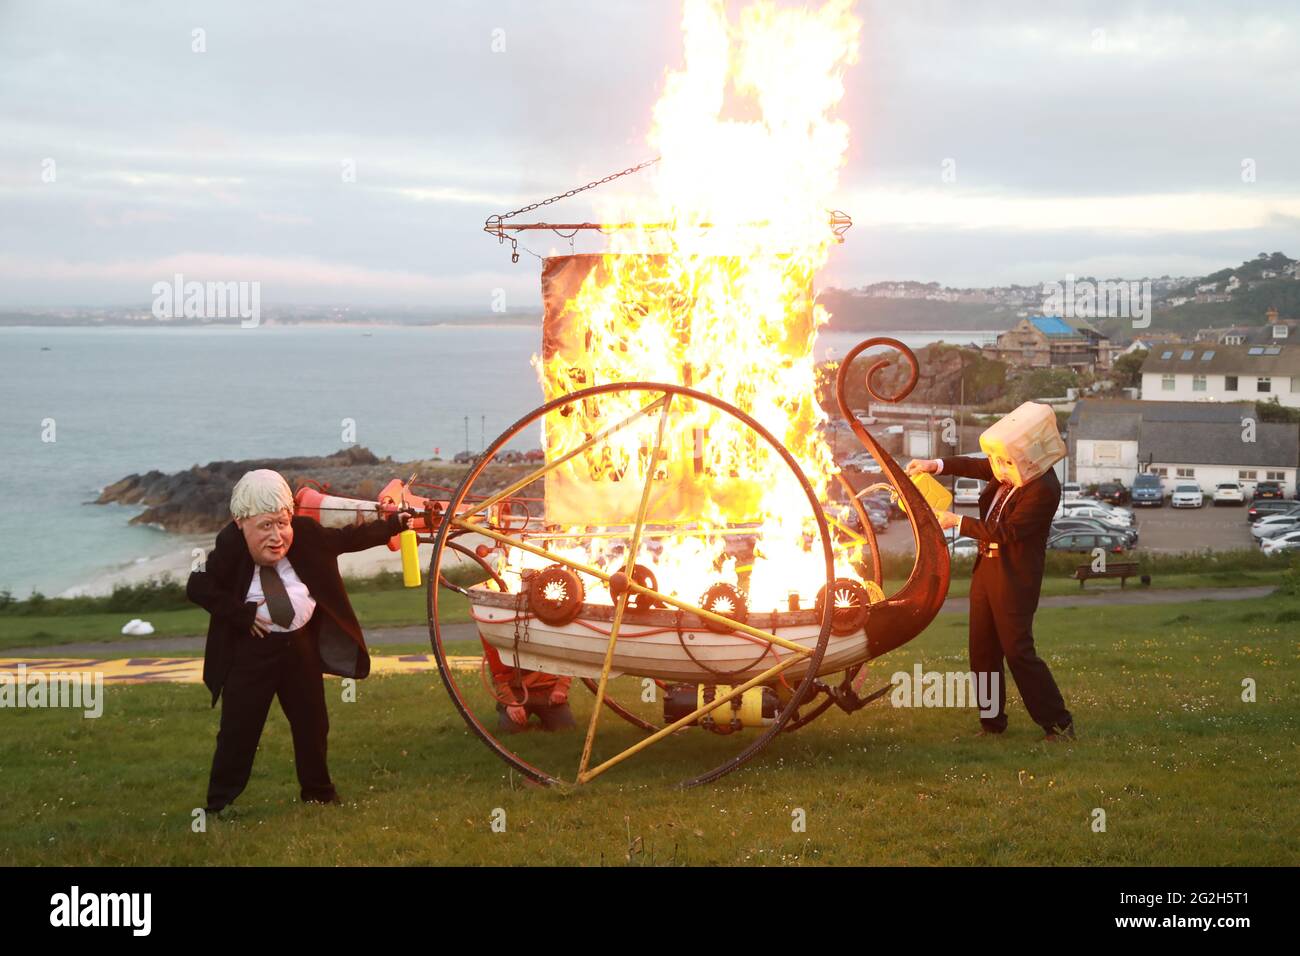 St Ives, Cornwall, UK. 11th June, 2021. Ocean Rebellion stage a fiery warning about the rising sea levels and the dangers of nit looking after oyr oceans. The message was aimed squarely at teh G7 leaders currently staying in Carbis Bay. Credit: Natasha Quarmby/Alamy Live News Stock Photo